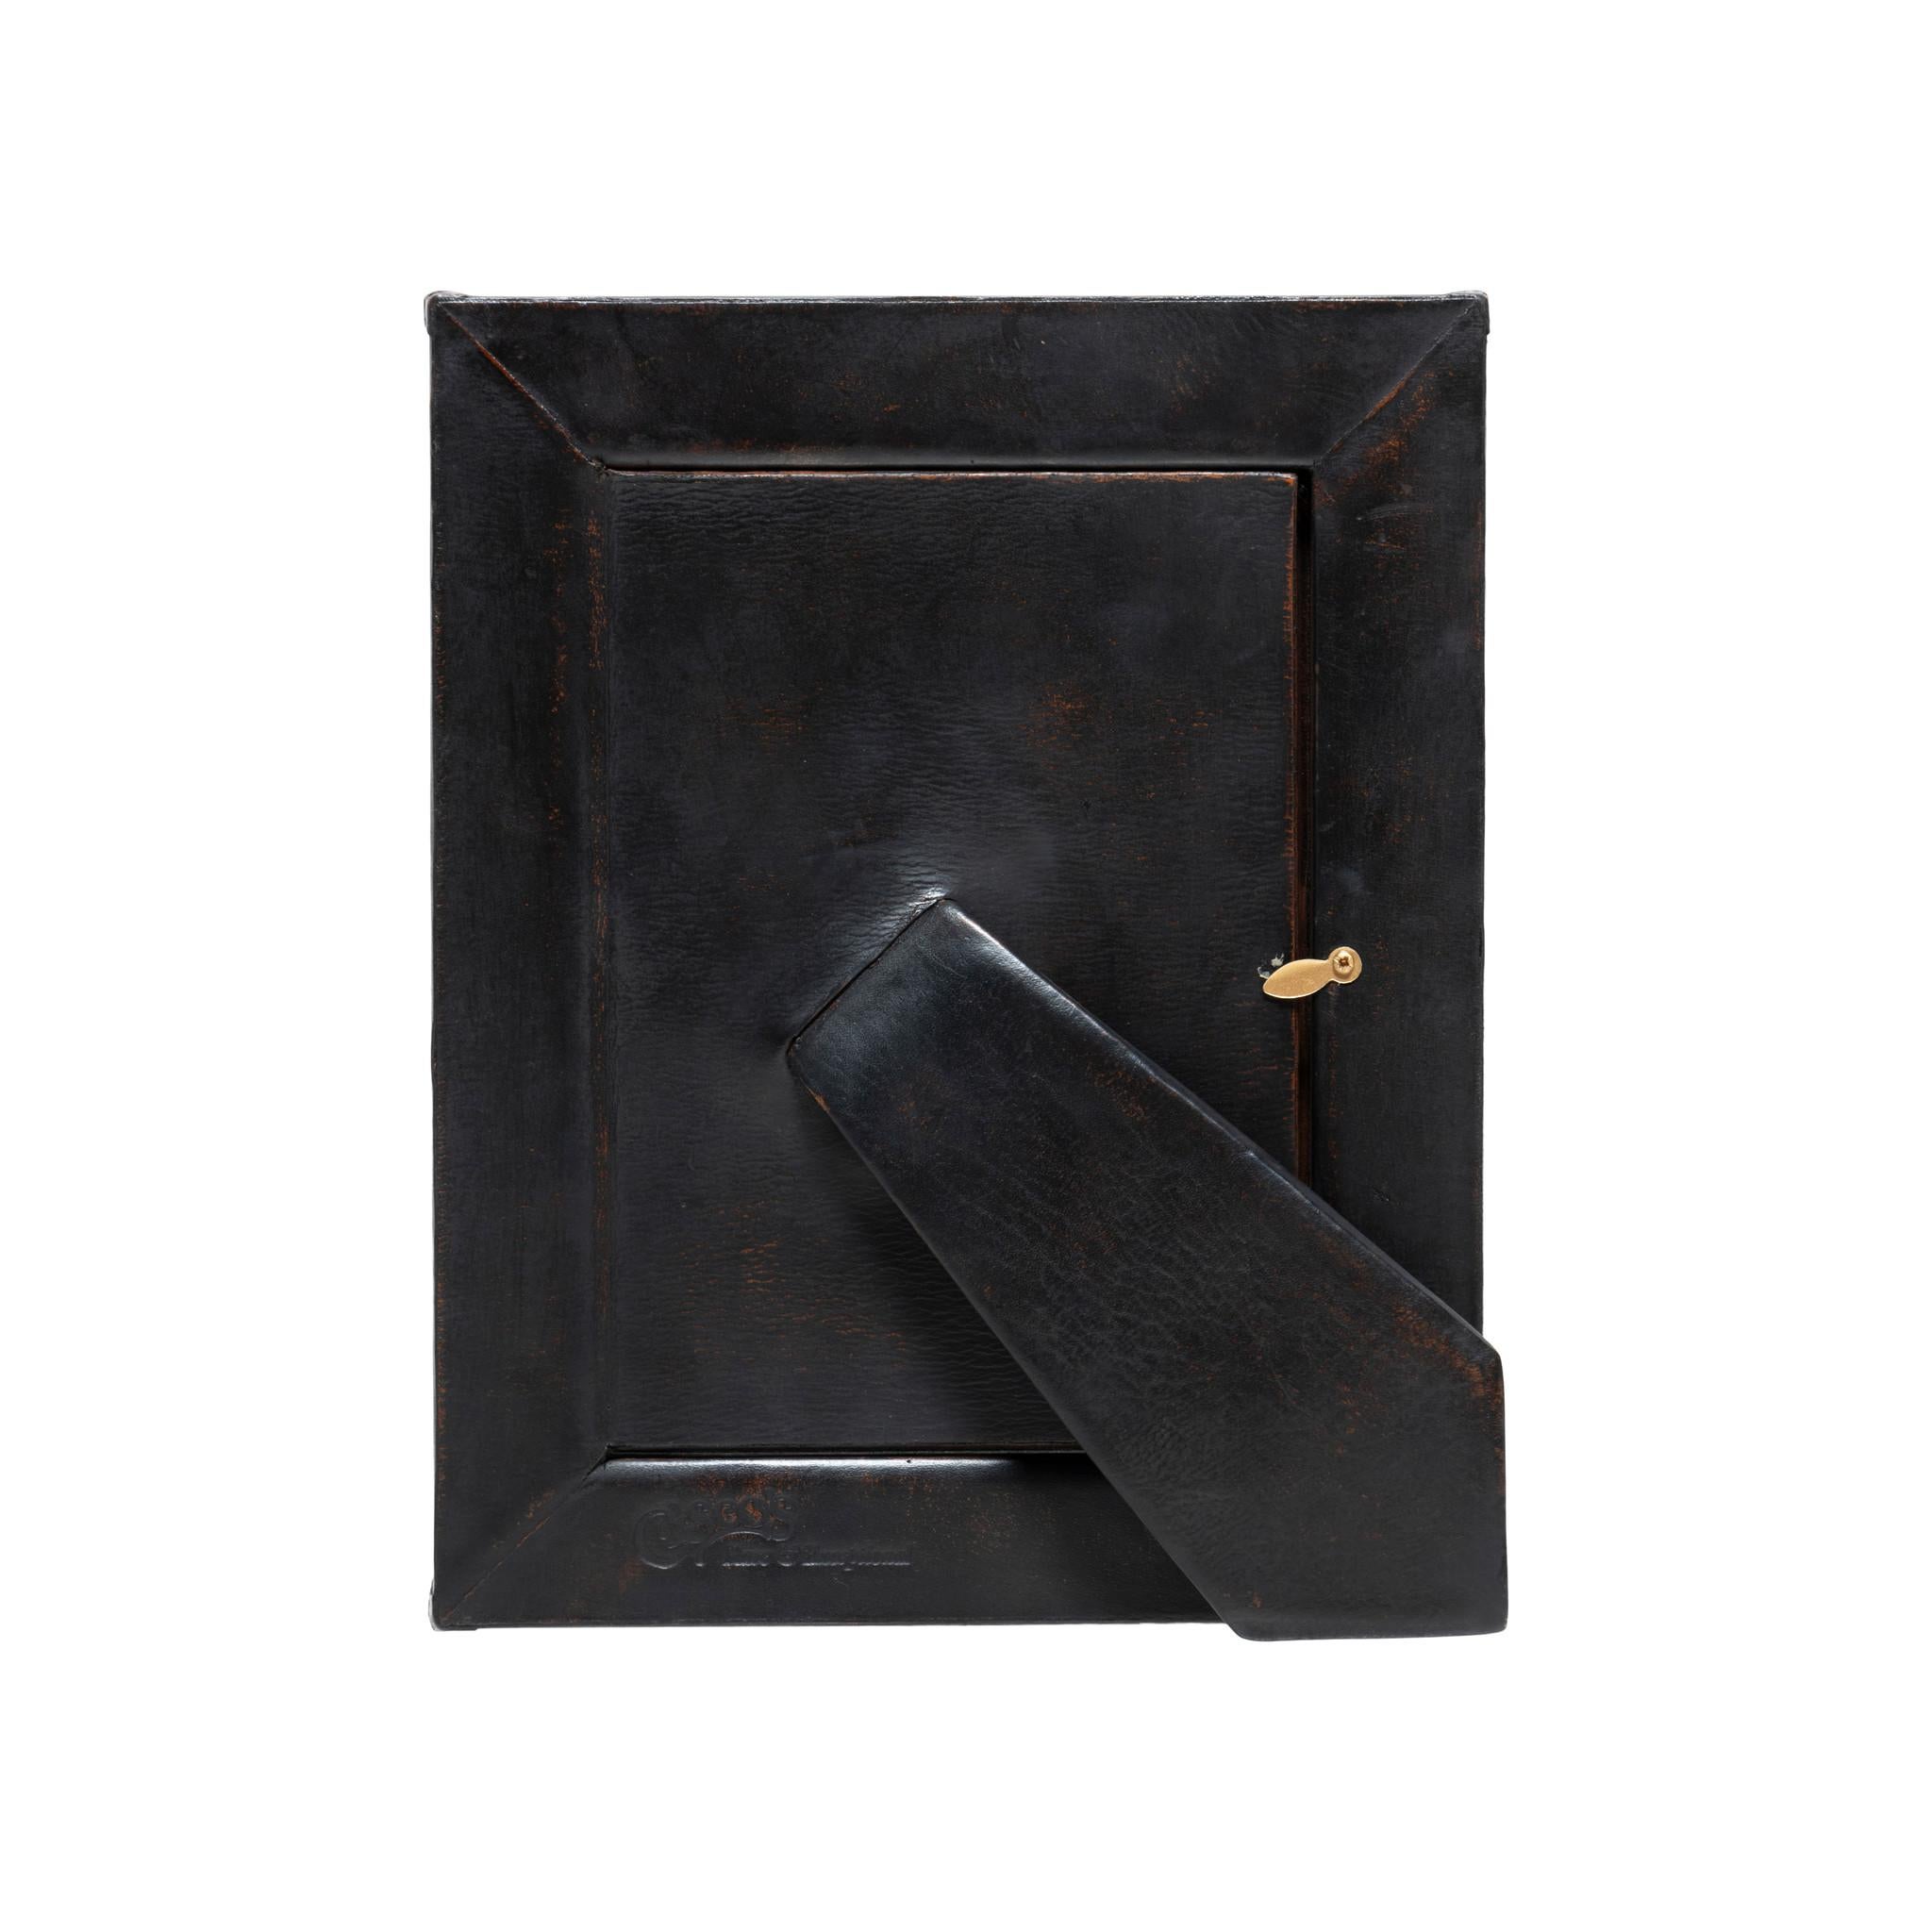 Contemporary 4x6 Medium Brown and Black Leather Tabletop Picture Frame - The Artisan For Sale